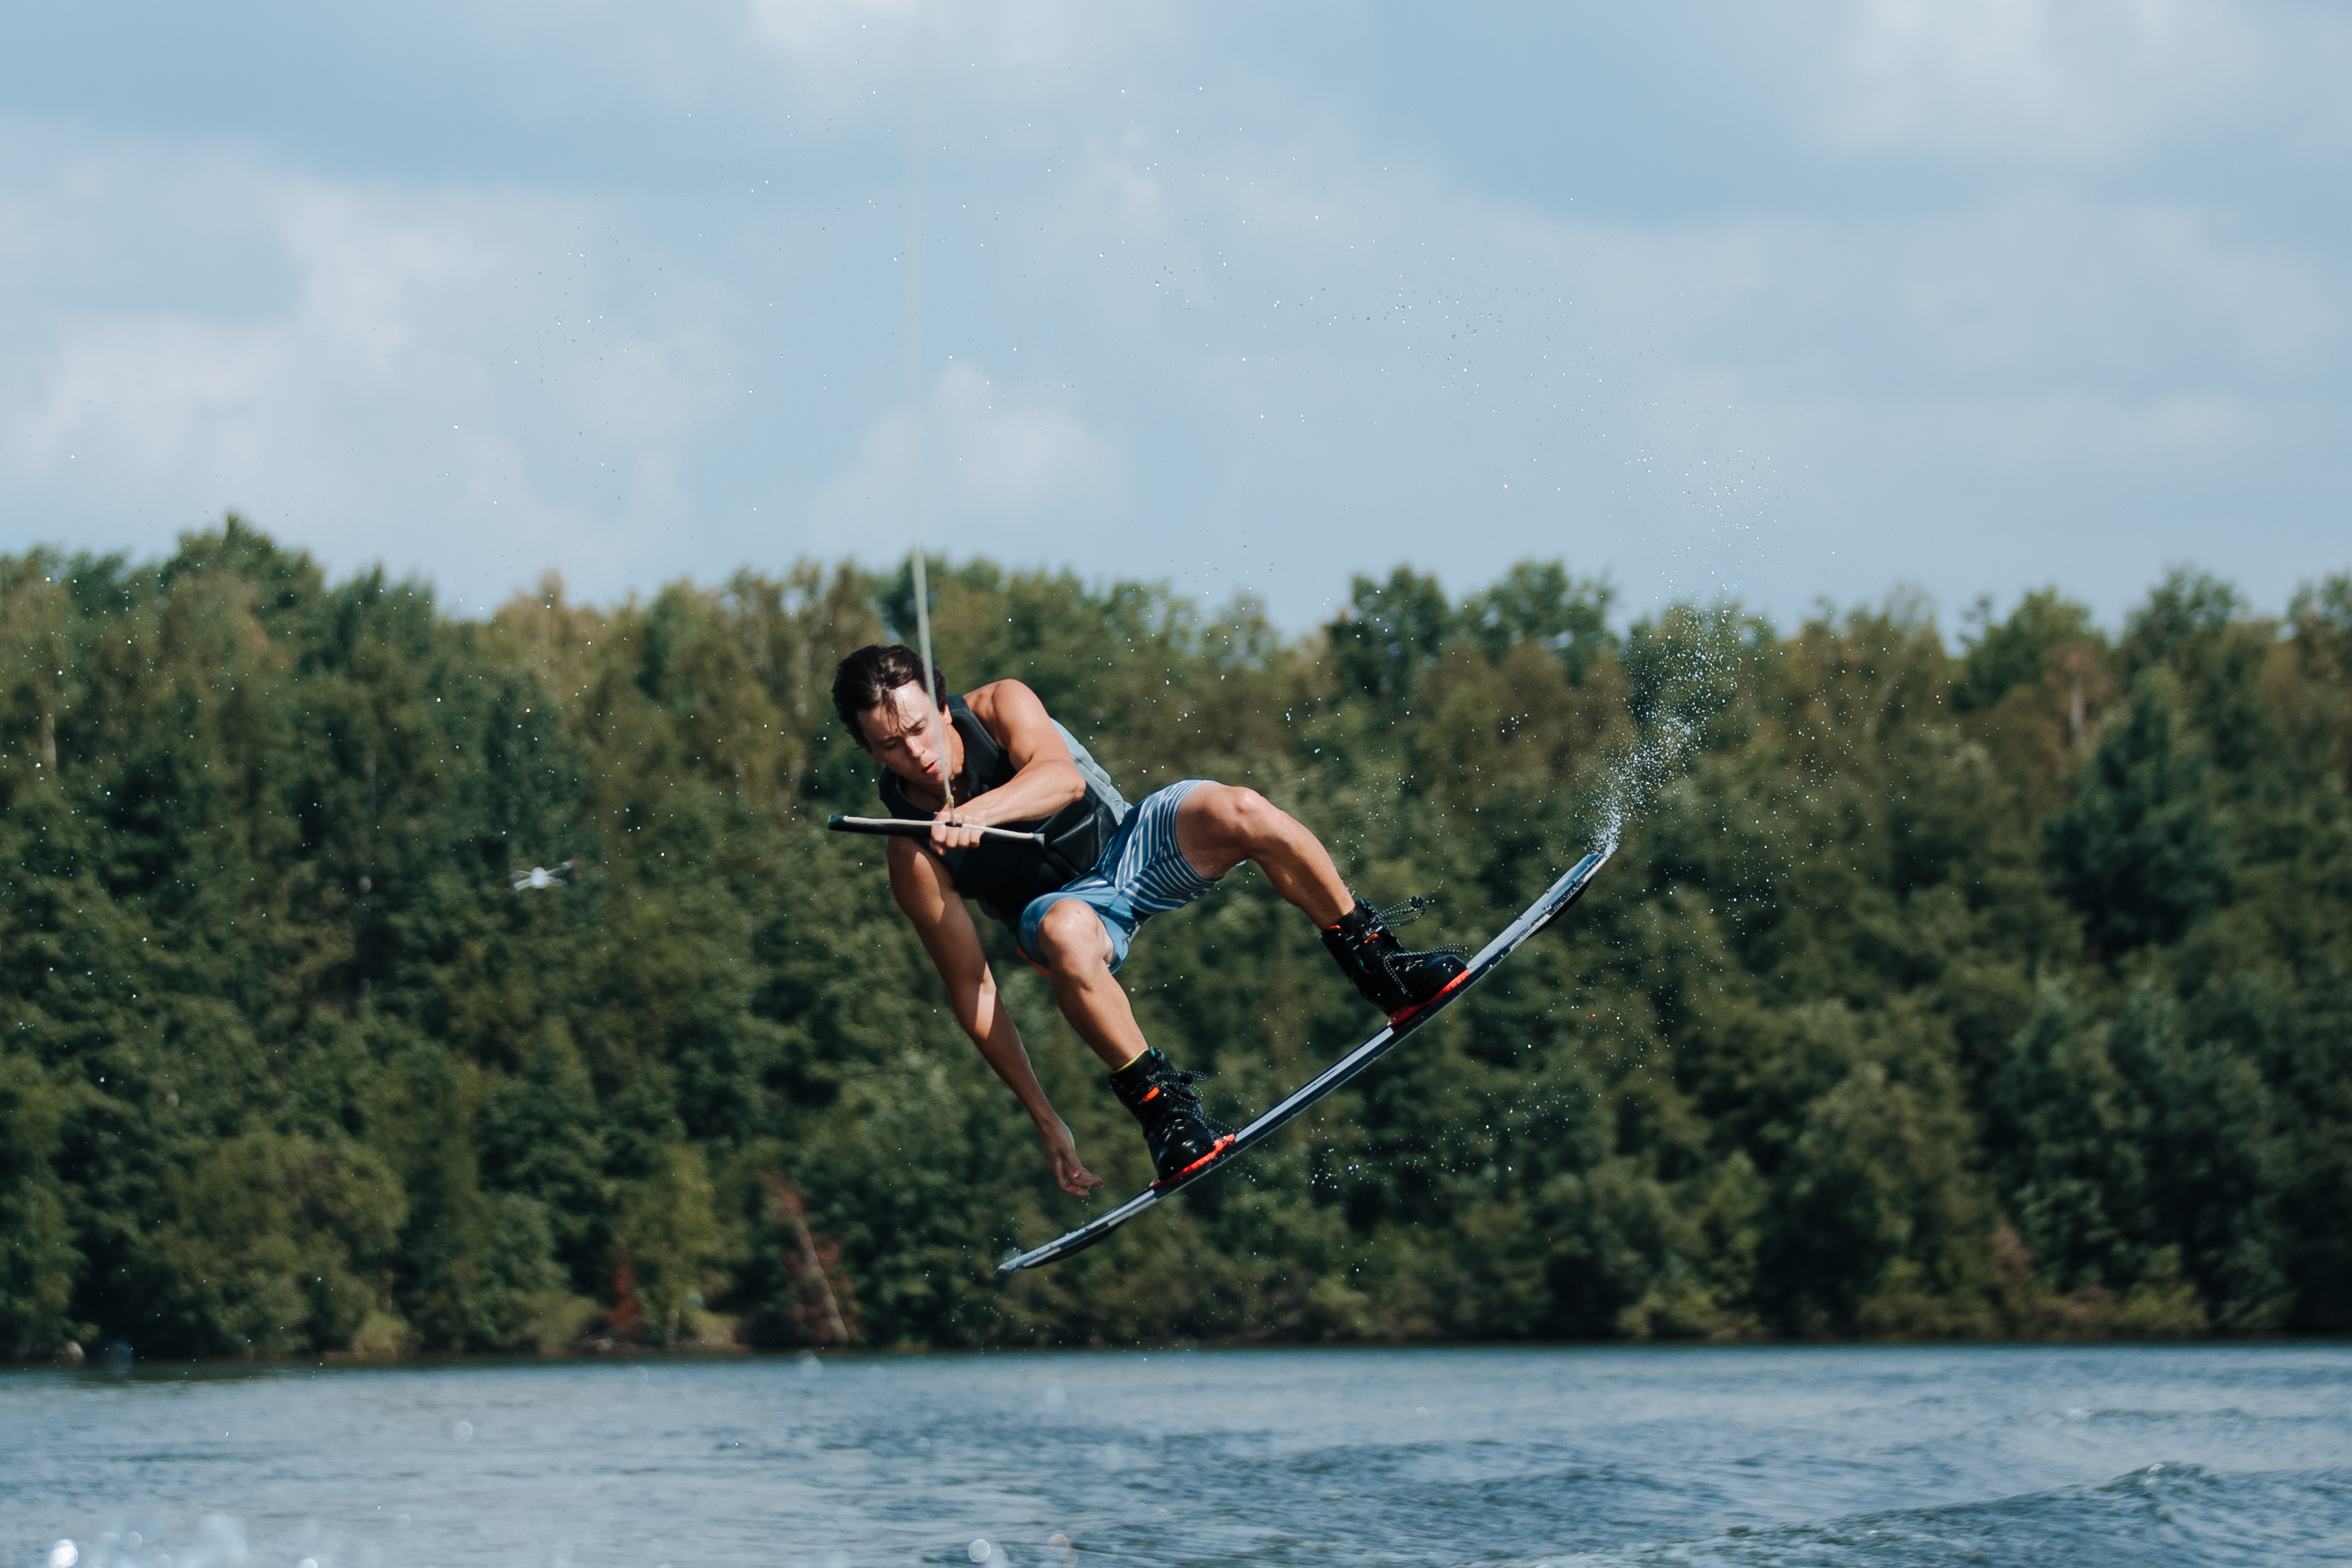 Wakeboarding: Wakeboarder performs aerial maneuvers and exciting tricks, Extreme water sports. 2950x1970 HD Wallpaper.